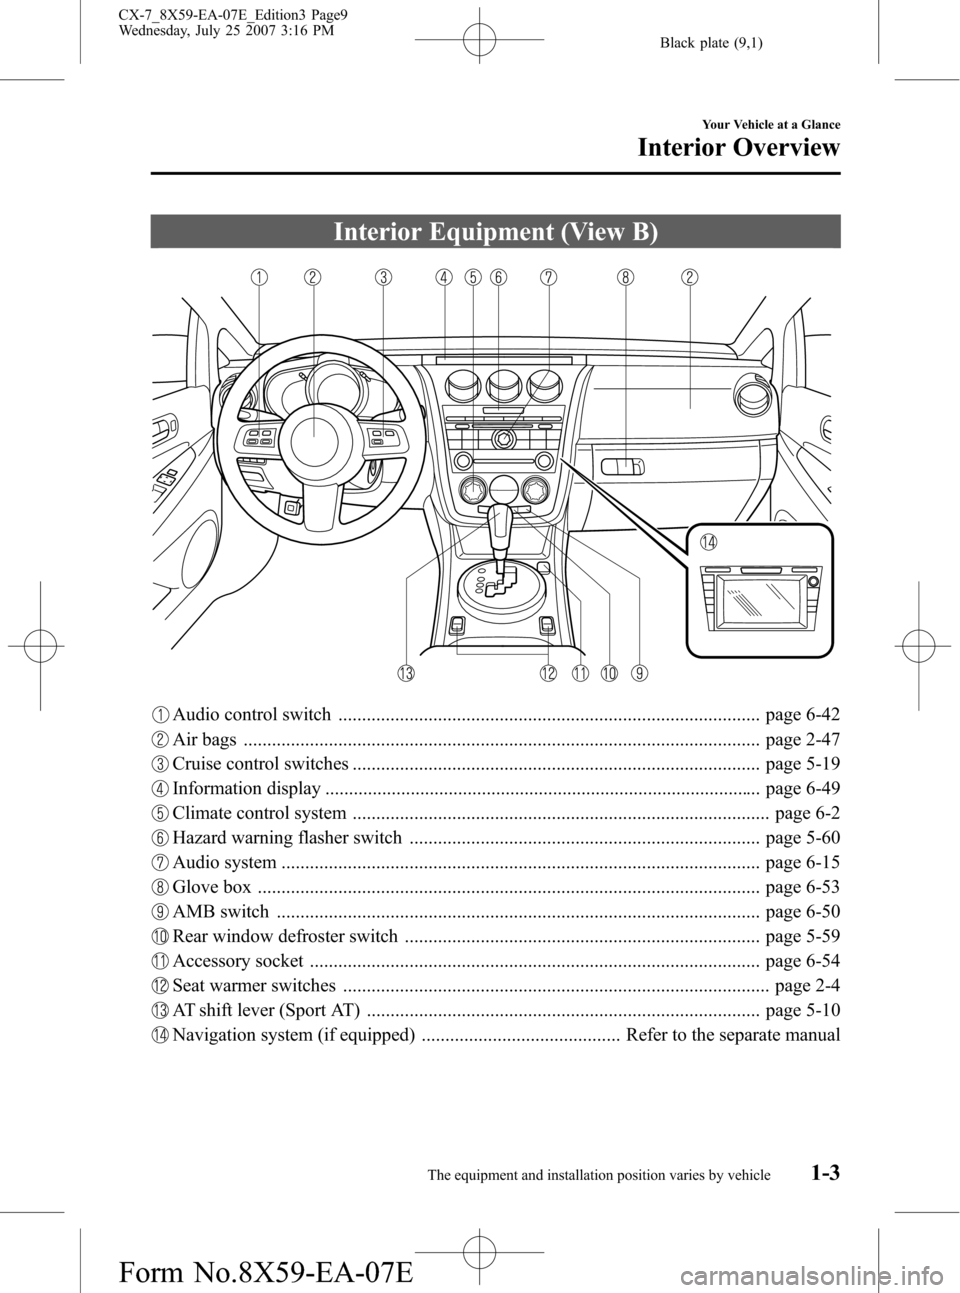 MAZDA MODEL CX-7 2008  Owners Manual (in English) Black plate (9,1)
Interior Equipment (View B)
Audio control switch ......................................................................................... page 6-42
Air bags ........................